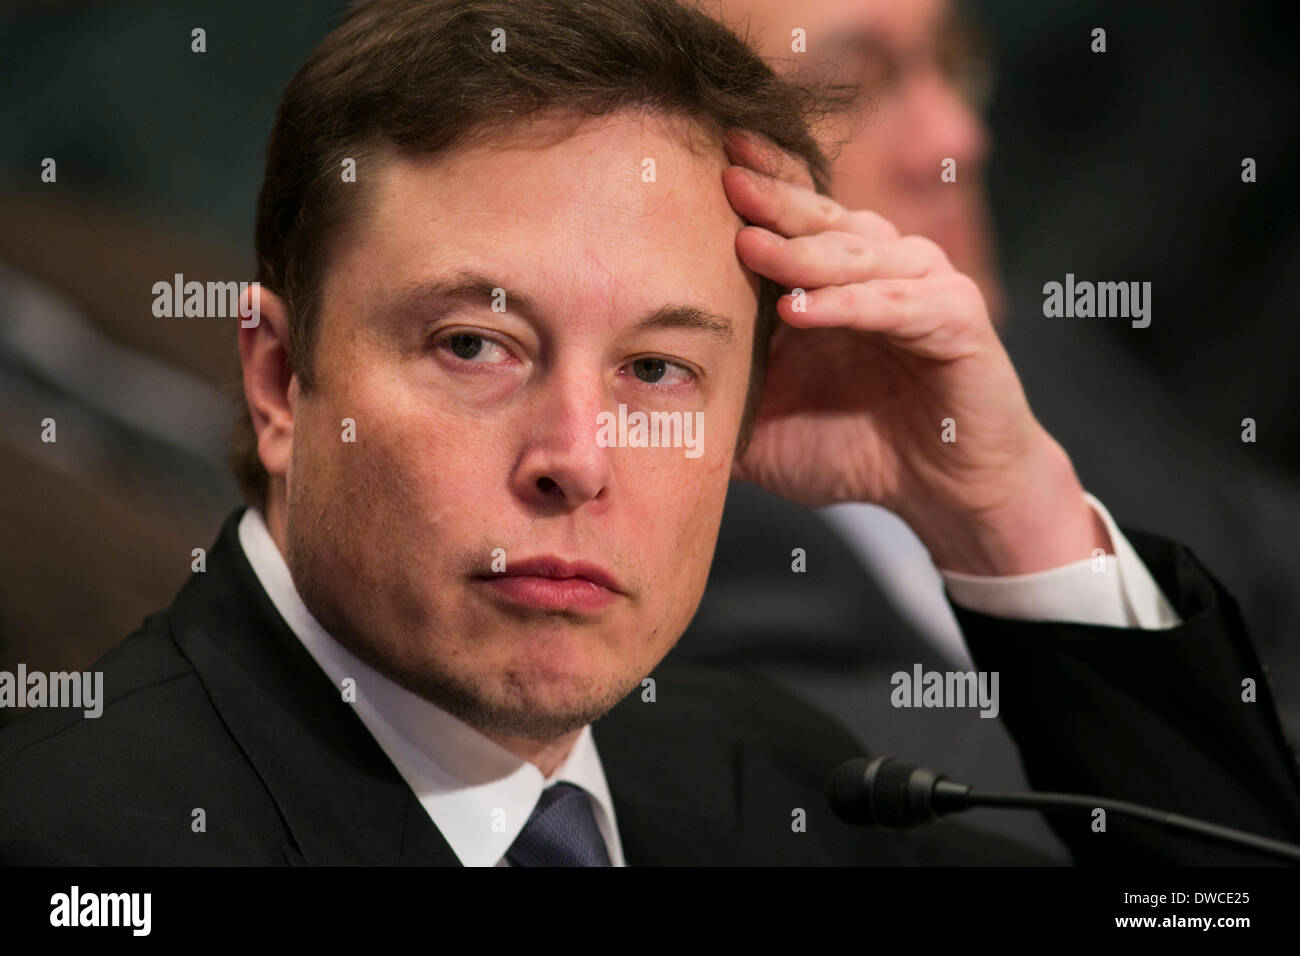 Washington DC, USA. 5th March 2014. Elon Musk, CEO of Space Exploration Technologies, also known as SpaceX, testifies before the Senate Appropriations Defense Subcommittee during a hearing on "National Security Space Launch Systems" in Washington, D.C. on March 5, 2014. Credit:  Kristoffer Tripplaar/Alamy Live News Stock Photo